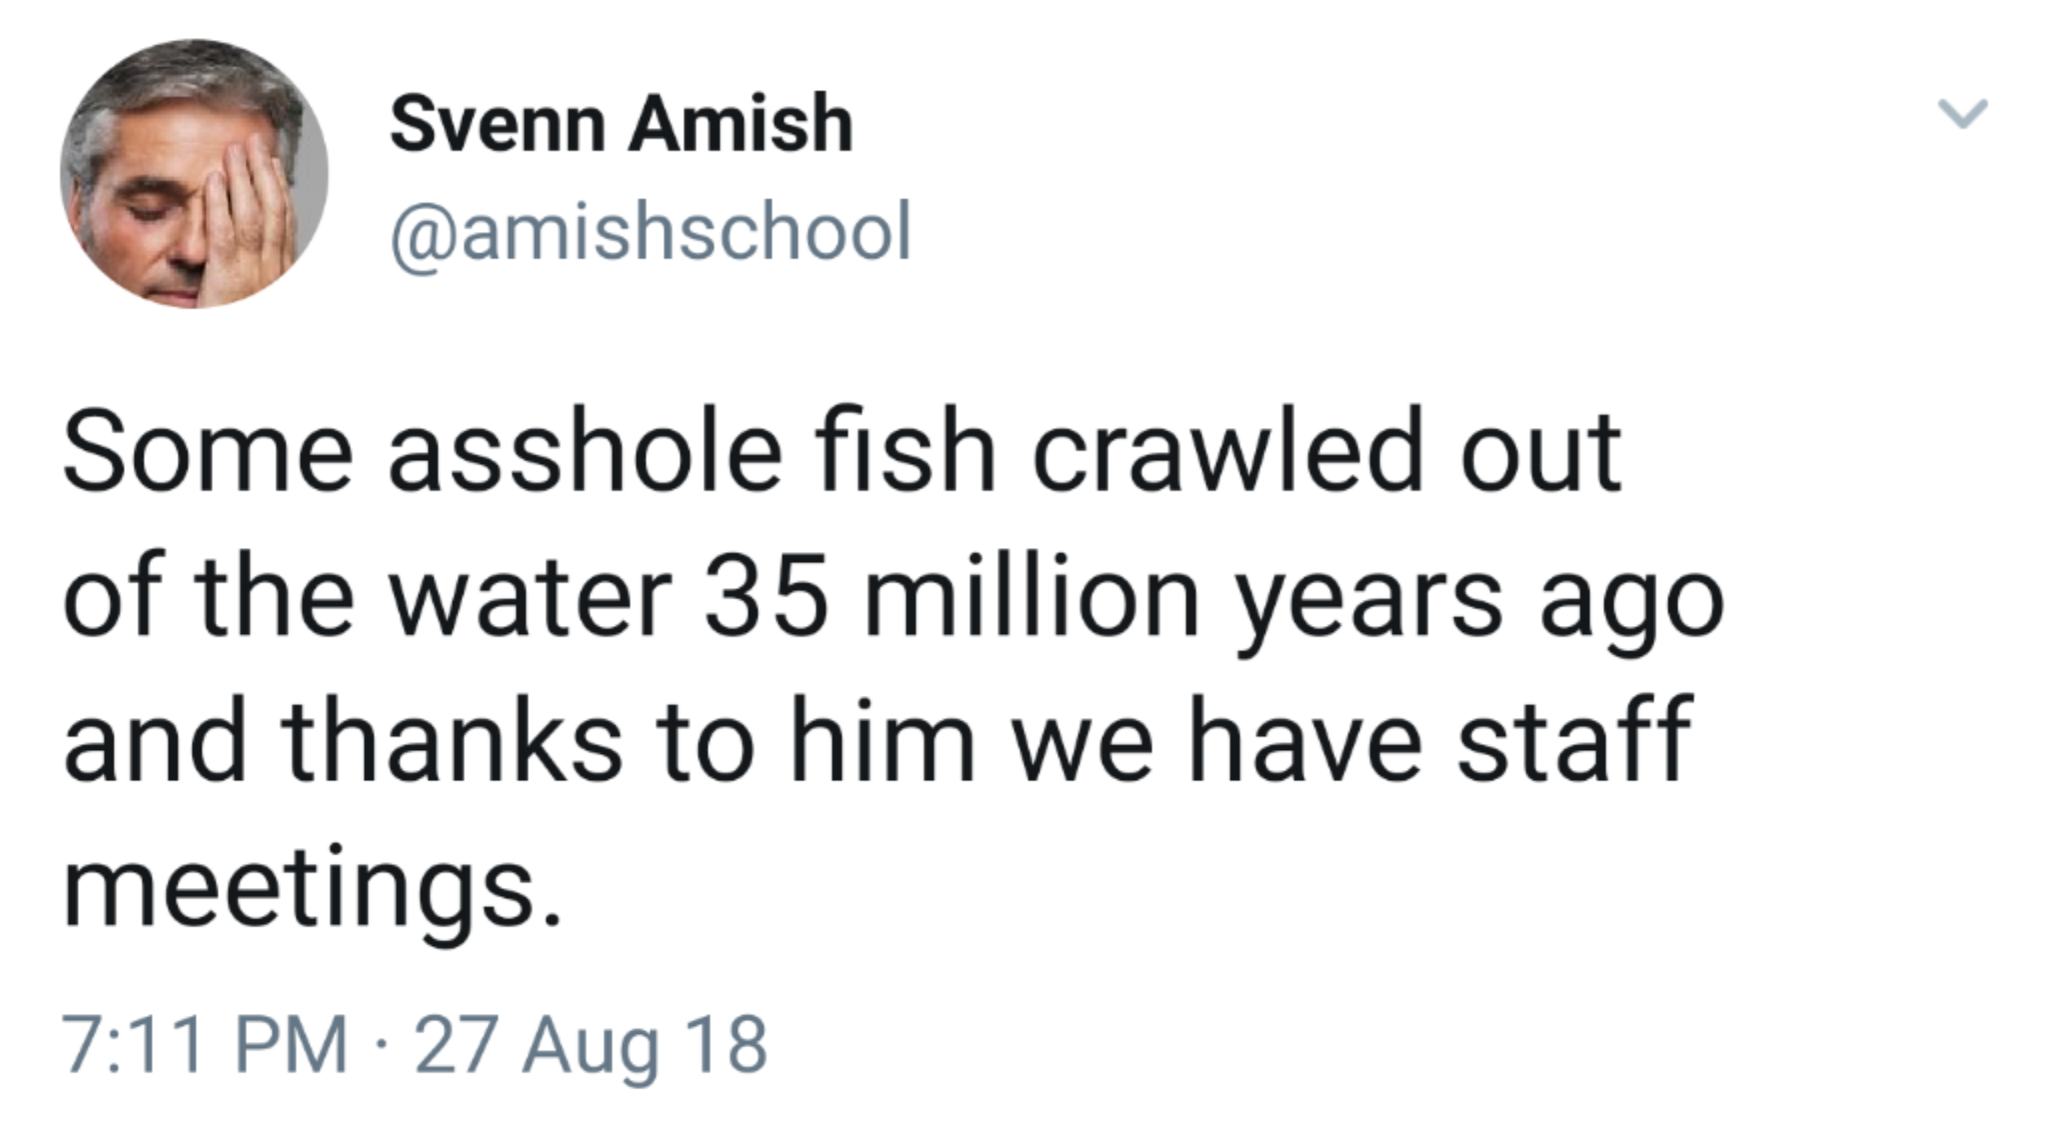 some asshole fish crawled - Svenn Amish Some asshole fish crawled out of the water 35 million years ago and thanks to him we have staff meetings. 27 Aug 18